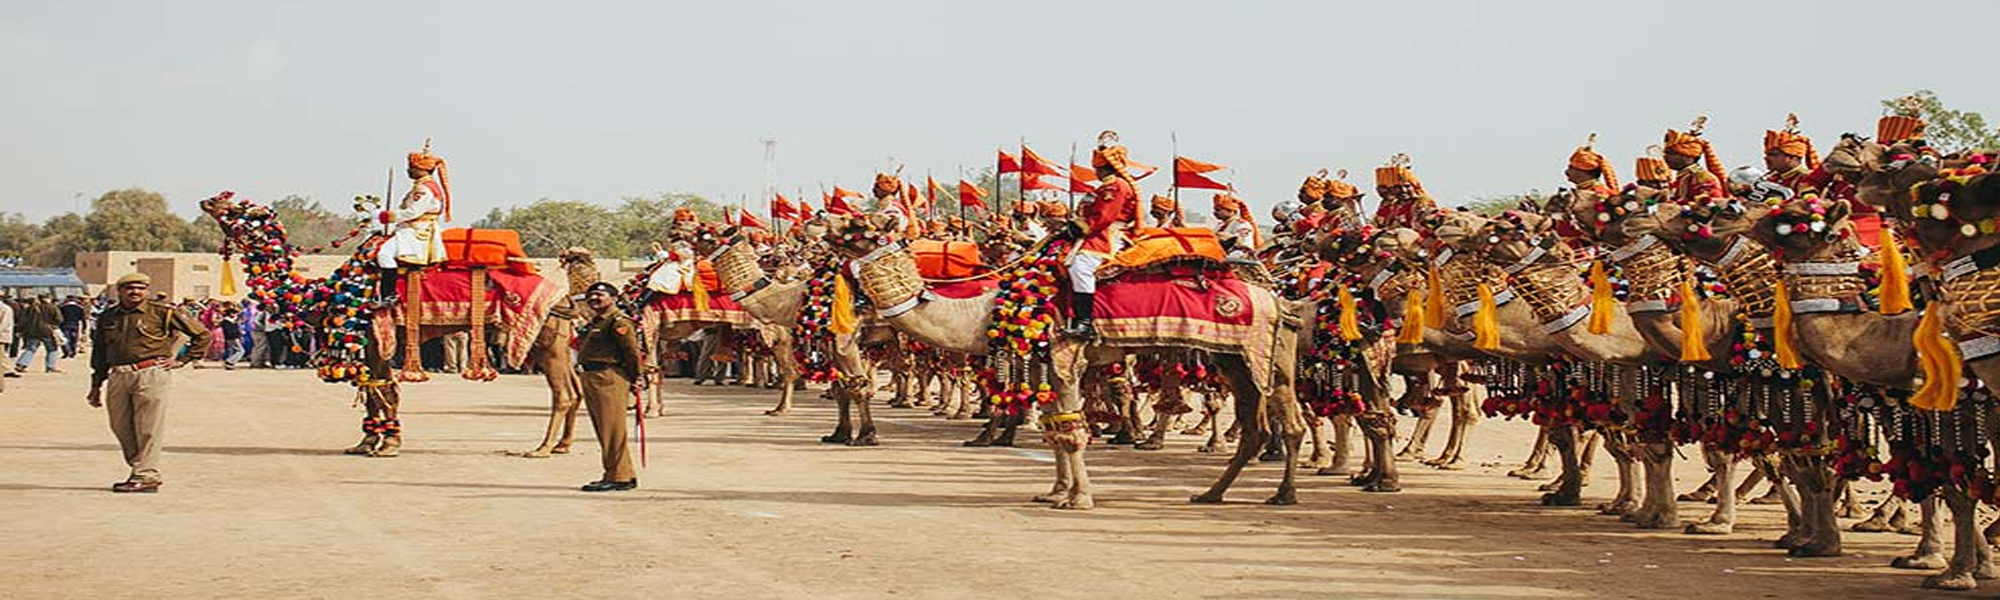 Camel Safari Tours in India with Marwar Festival Tours in India